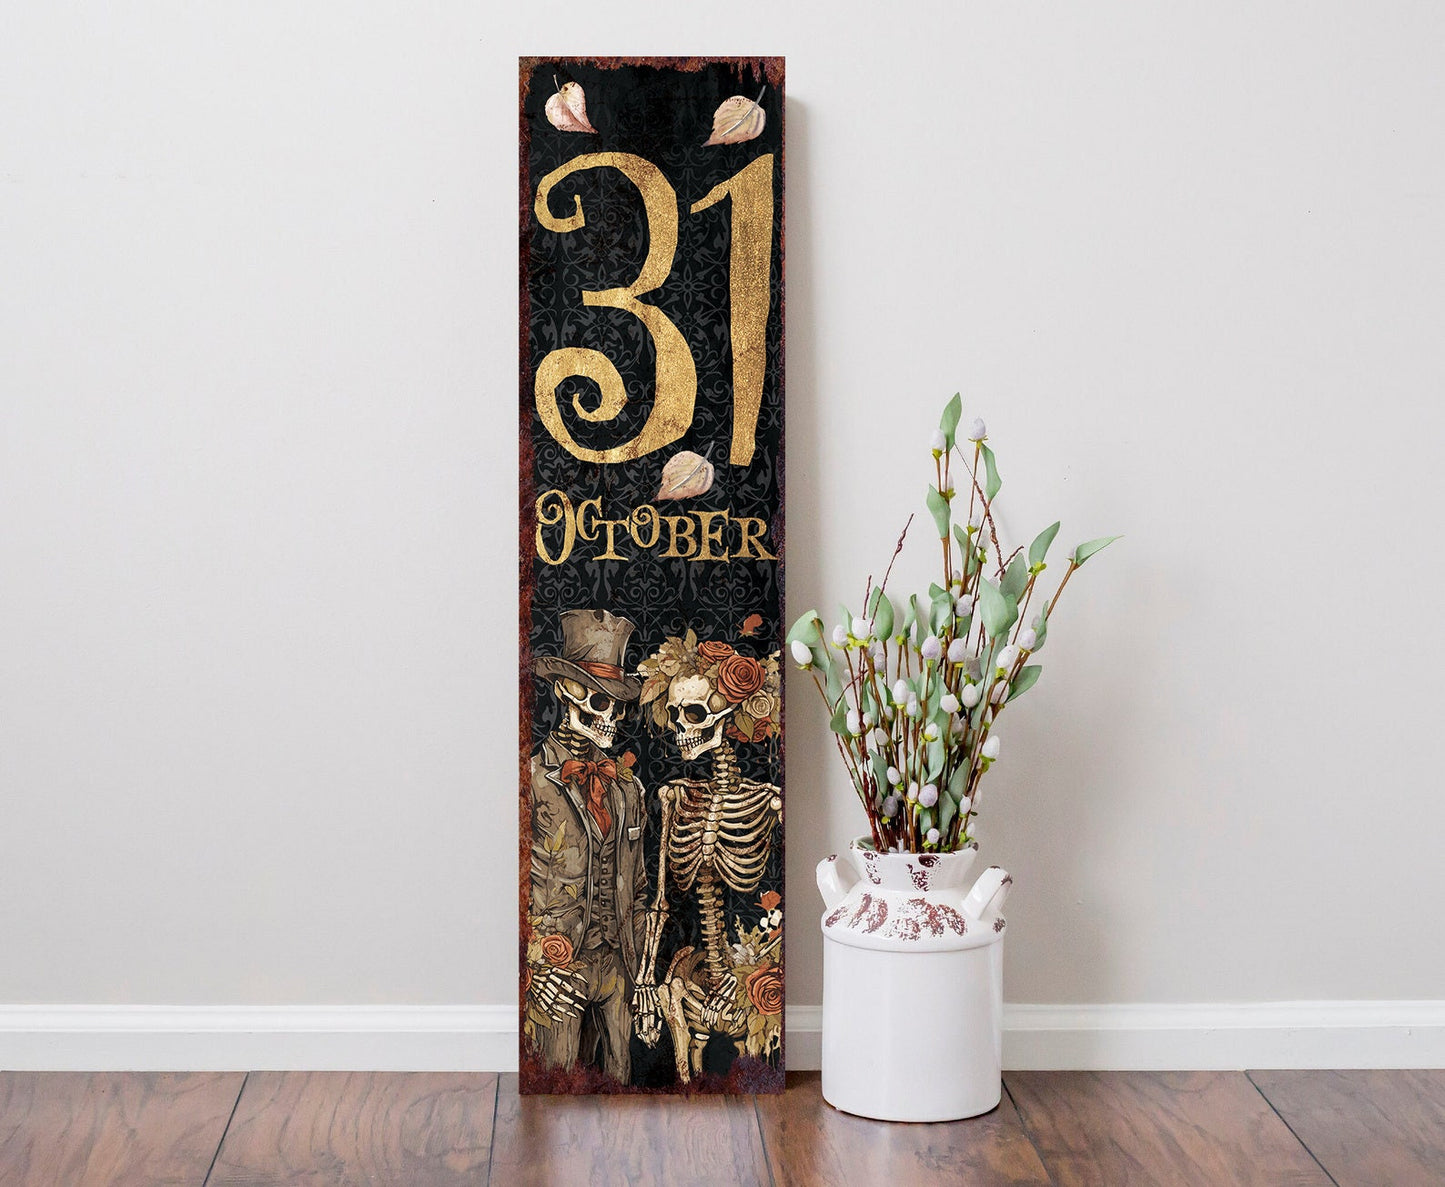 36in Halloween Porch Sign Decoration - Rustic Halloween Sign, October 31 Wall Art Vintage Sign, Modern Farmhouse Mantel Entryway Decor